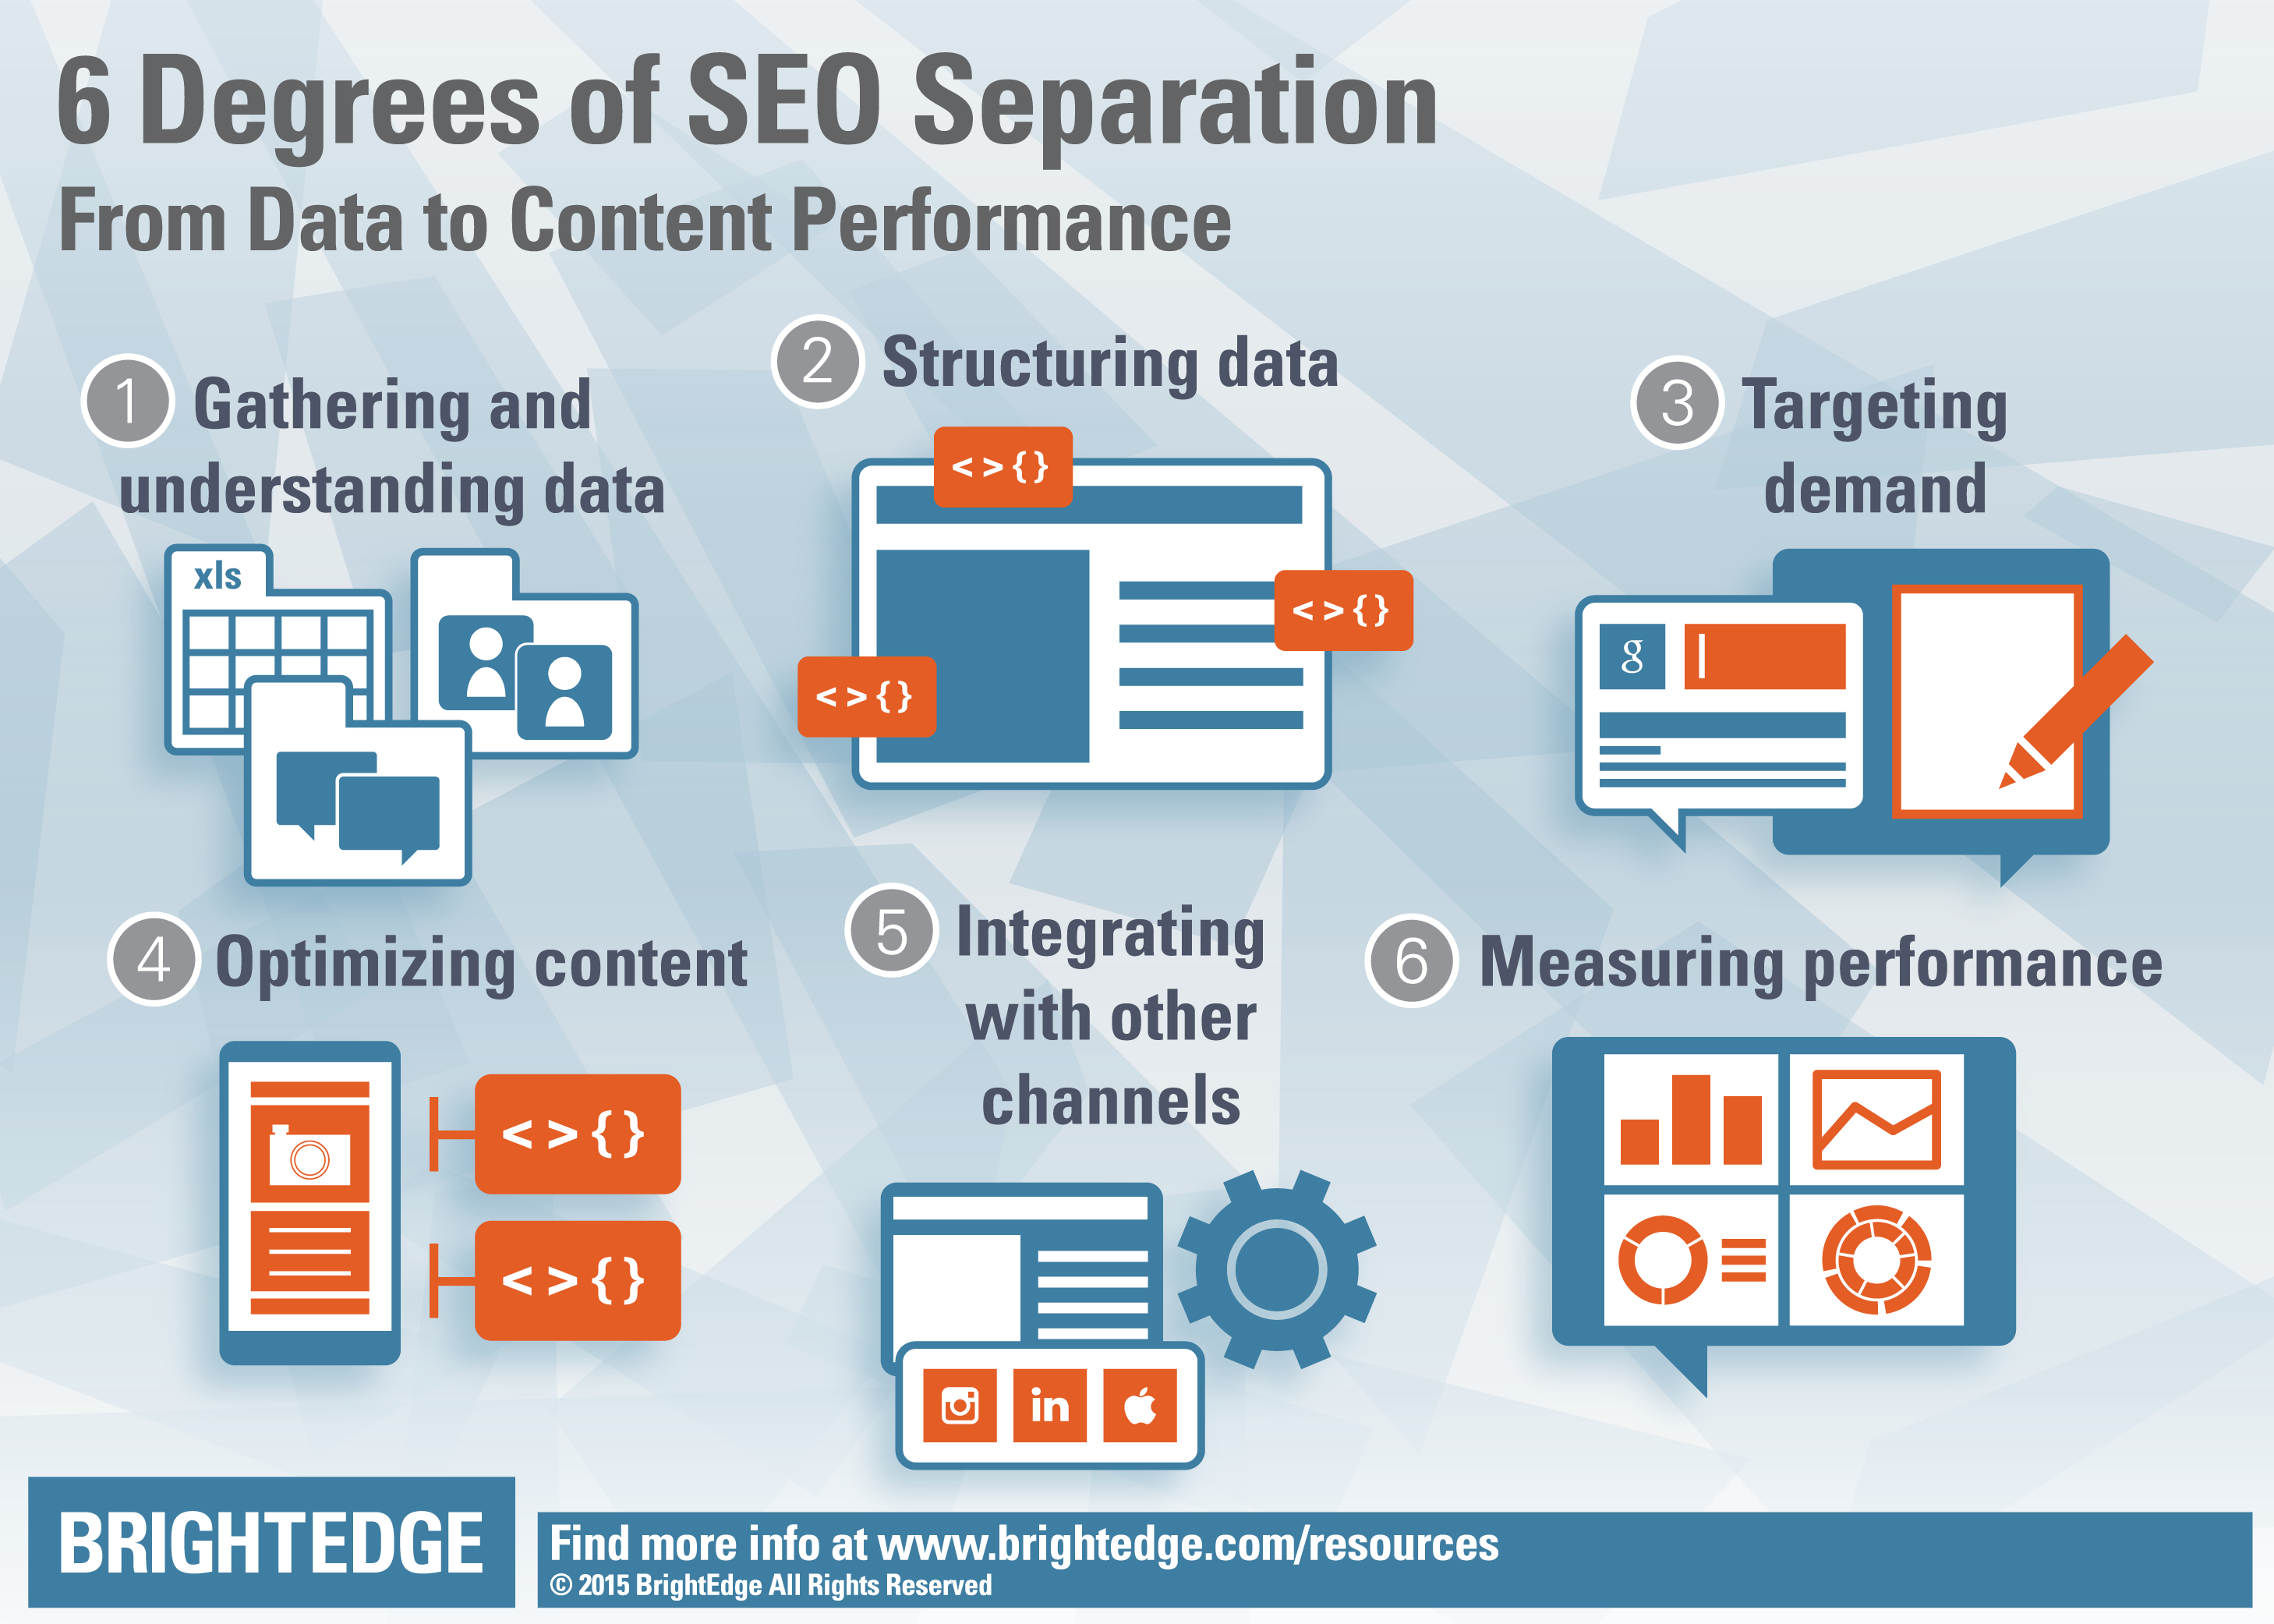 6 Degrees of SEO Separation